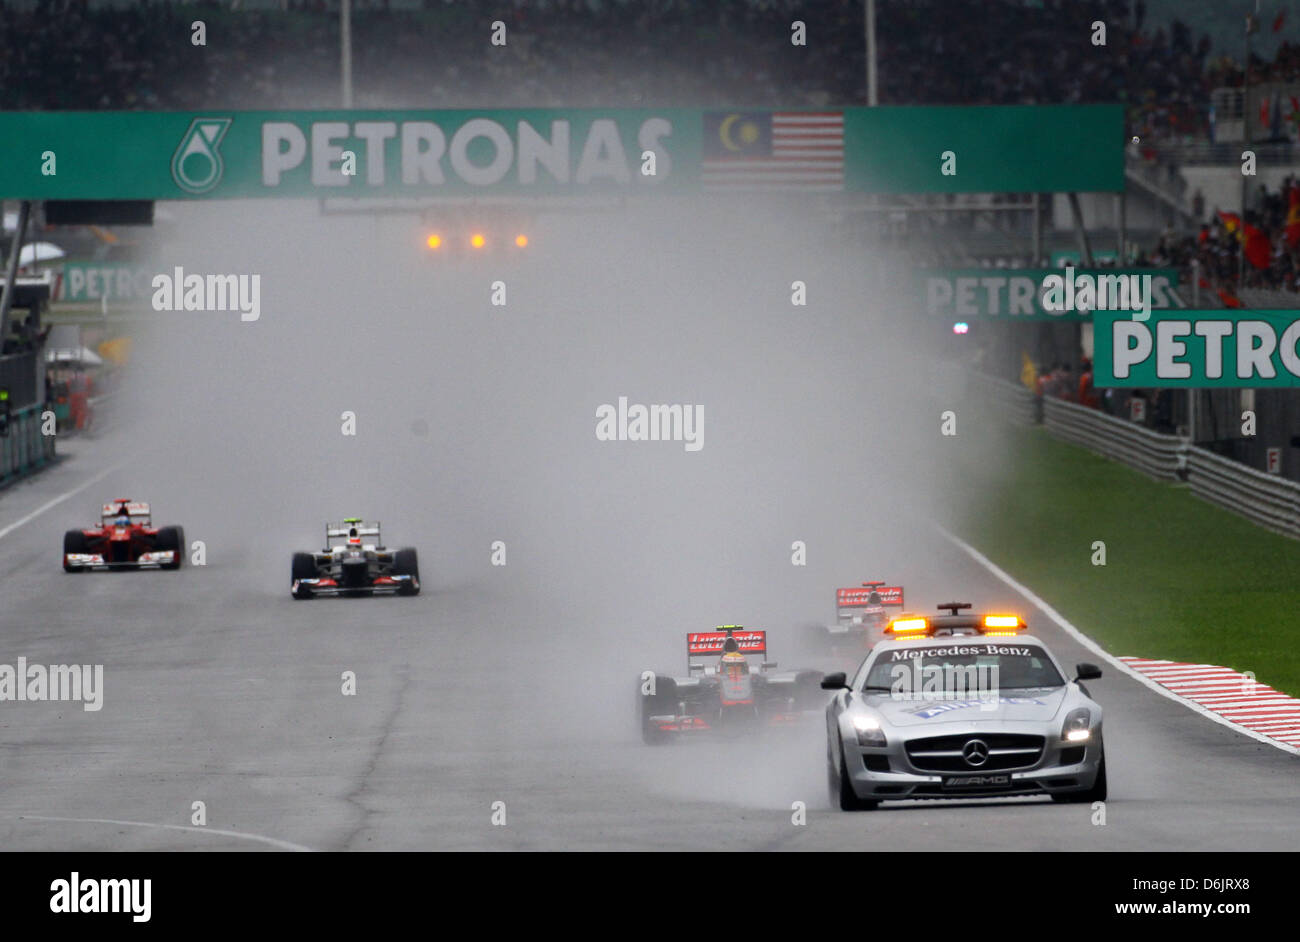 The safety car is back on track in front of the British Formula One driver Lewis Hamilton of McLaren Mercedes during the Formula One Grand Prix of Malaysia at the Sepang circuit, outside Kuala Lumpur, Malaysia, 25 March 2012. Photo: Jens Buettner dpa  +++(c) dpa - Bildfunk+++ Stock Photo